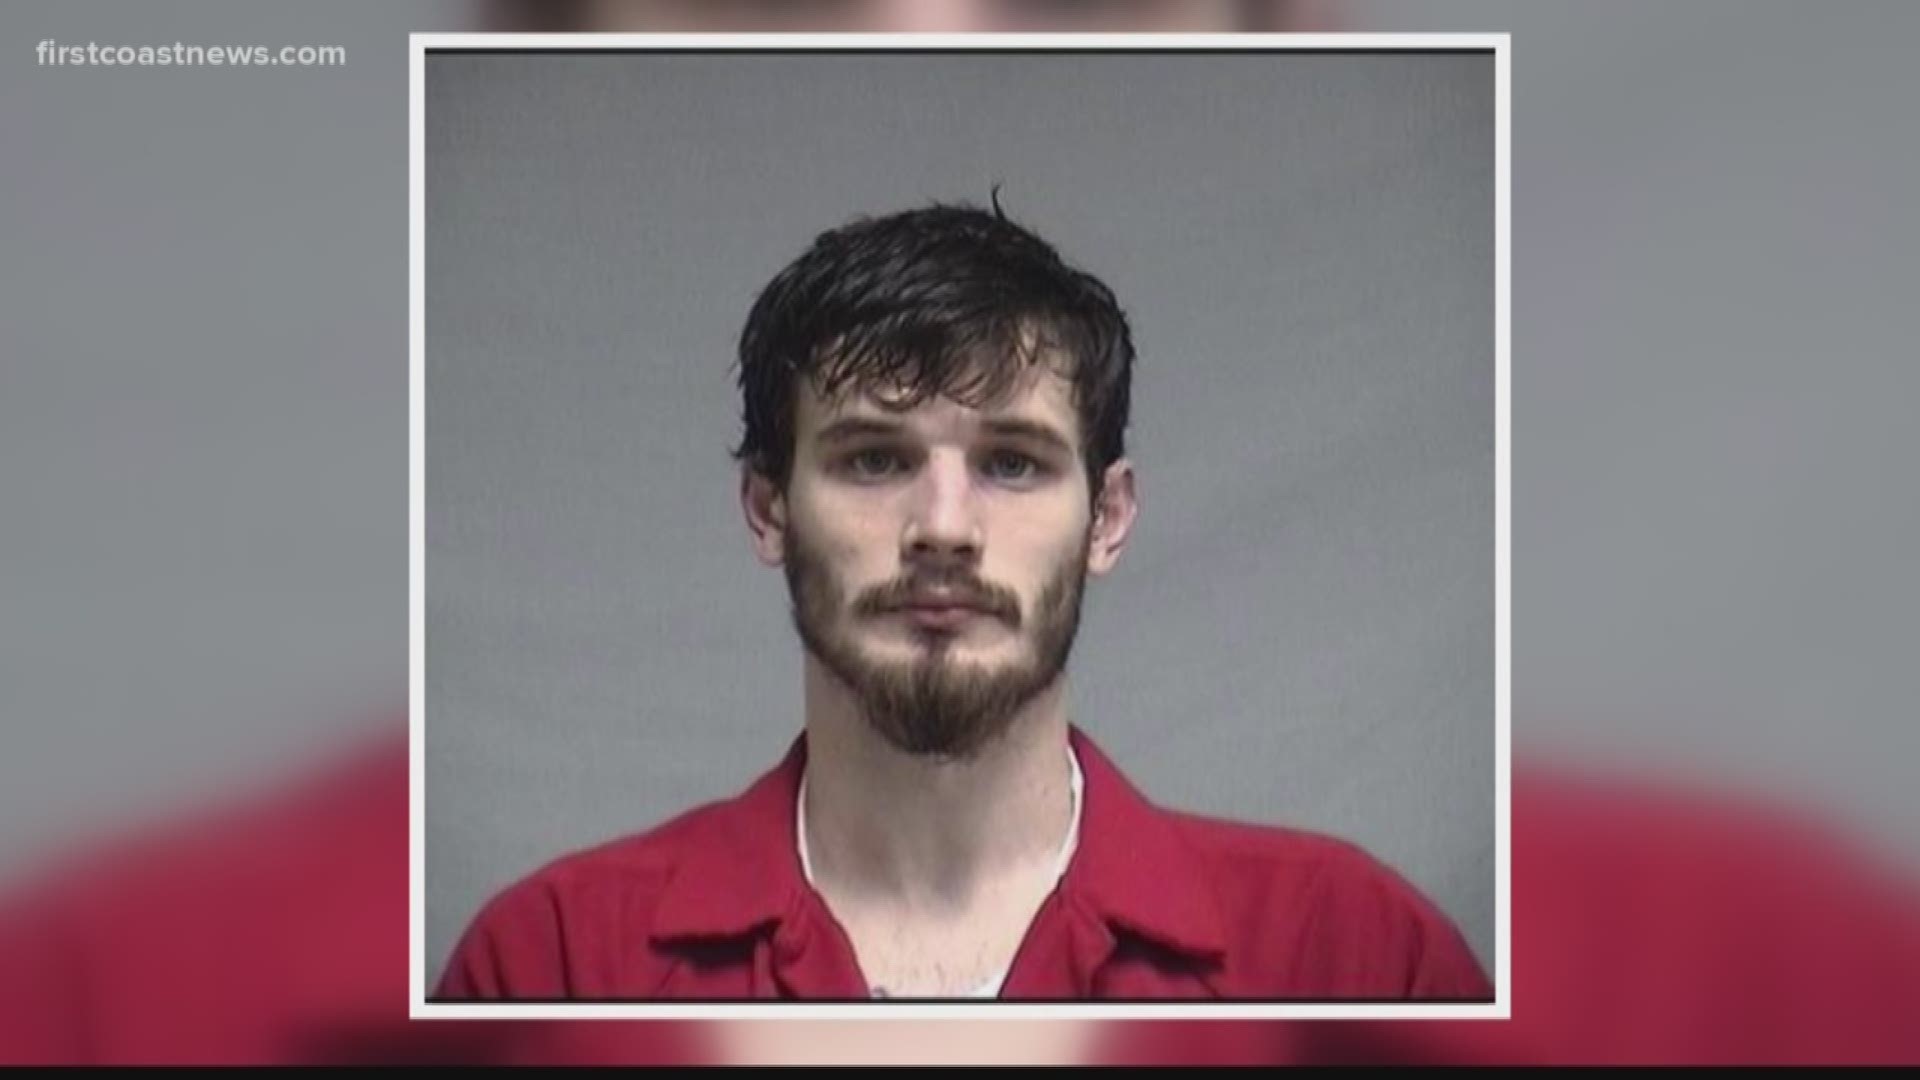 Michael Devon Shiver was arrested after a lengthy investigation that started on June 23, when the little boy was taken to Wolfson Children's Hospital with life-threatening injuries.